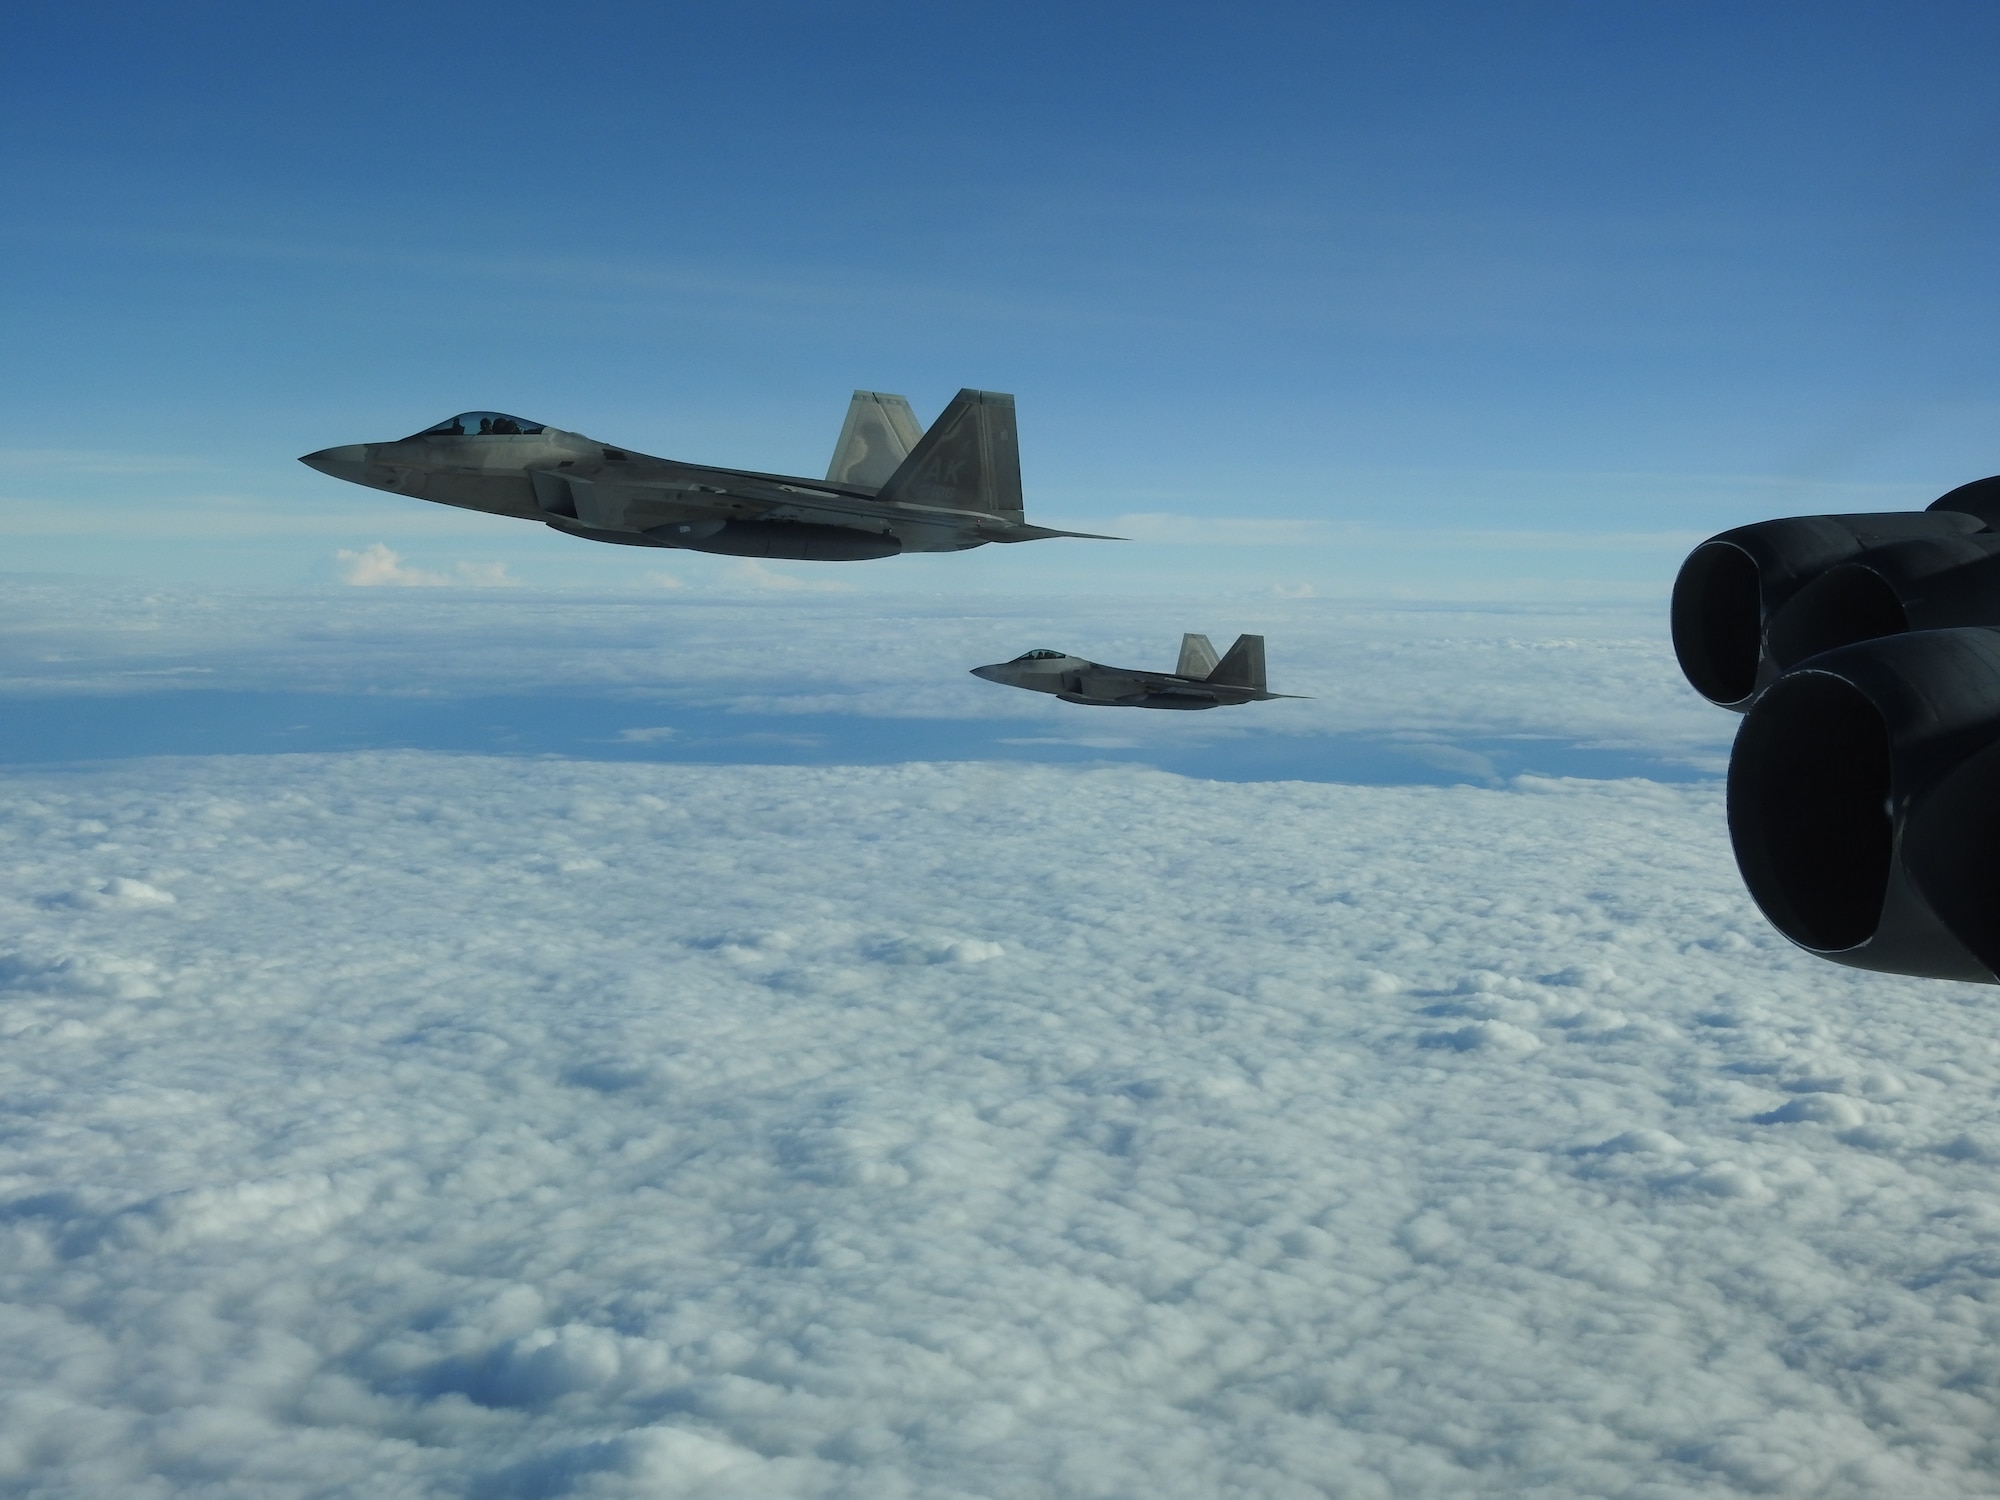 An F-22 Raptor, assigned to Joint Base Elmendorf, Richardson, Alaska, escorts a B-52 Stratofortress during a North American Aerospace Defense Command (NORAD) mission, June 14, 2020. NORAD routinely conducts intercept training in support of its mission to protect the sovereign airspaces of the United States and Canada. (Courtesy Photo)